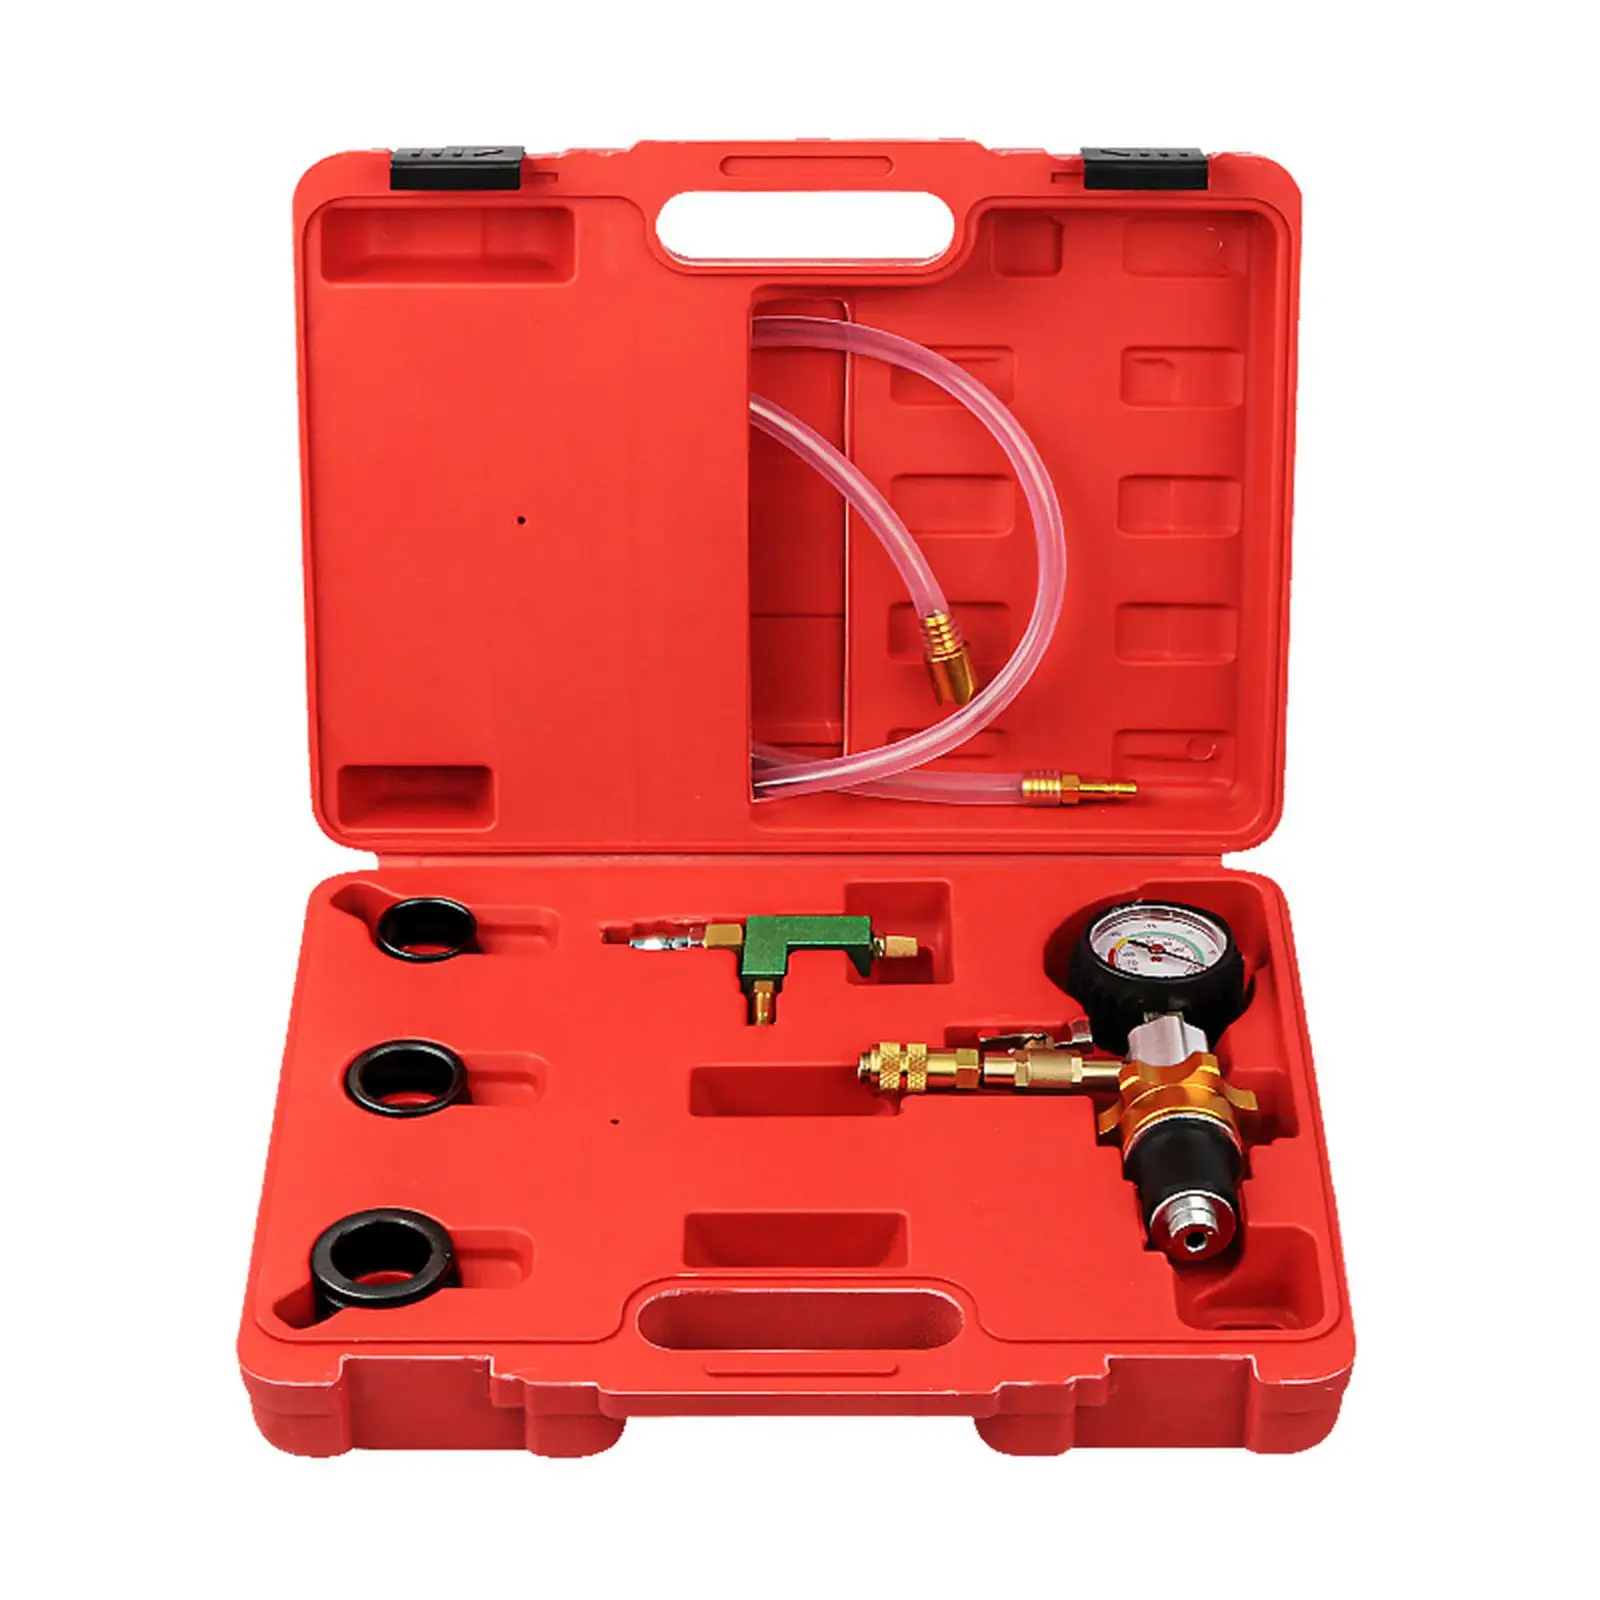 Vacuum Coolant Refill Tool set with 3 Adapters Radiator Pressure Tester for Truck